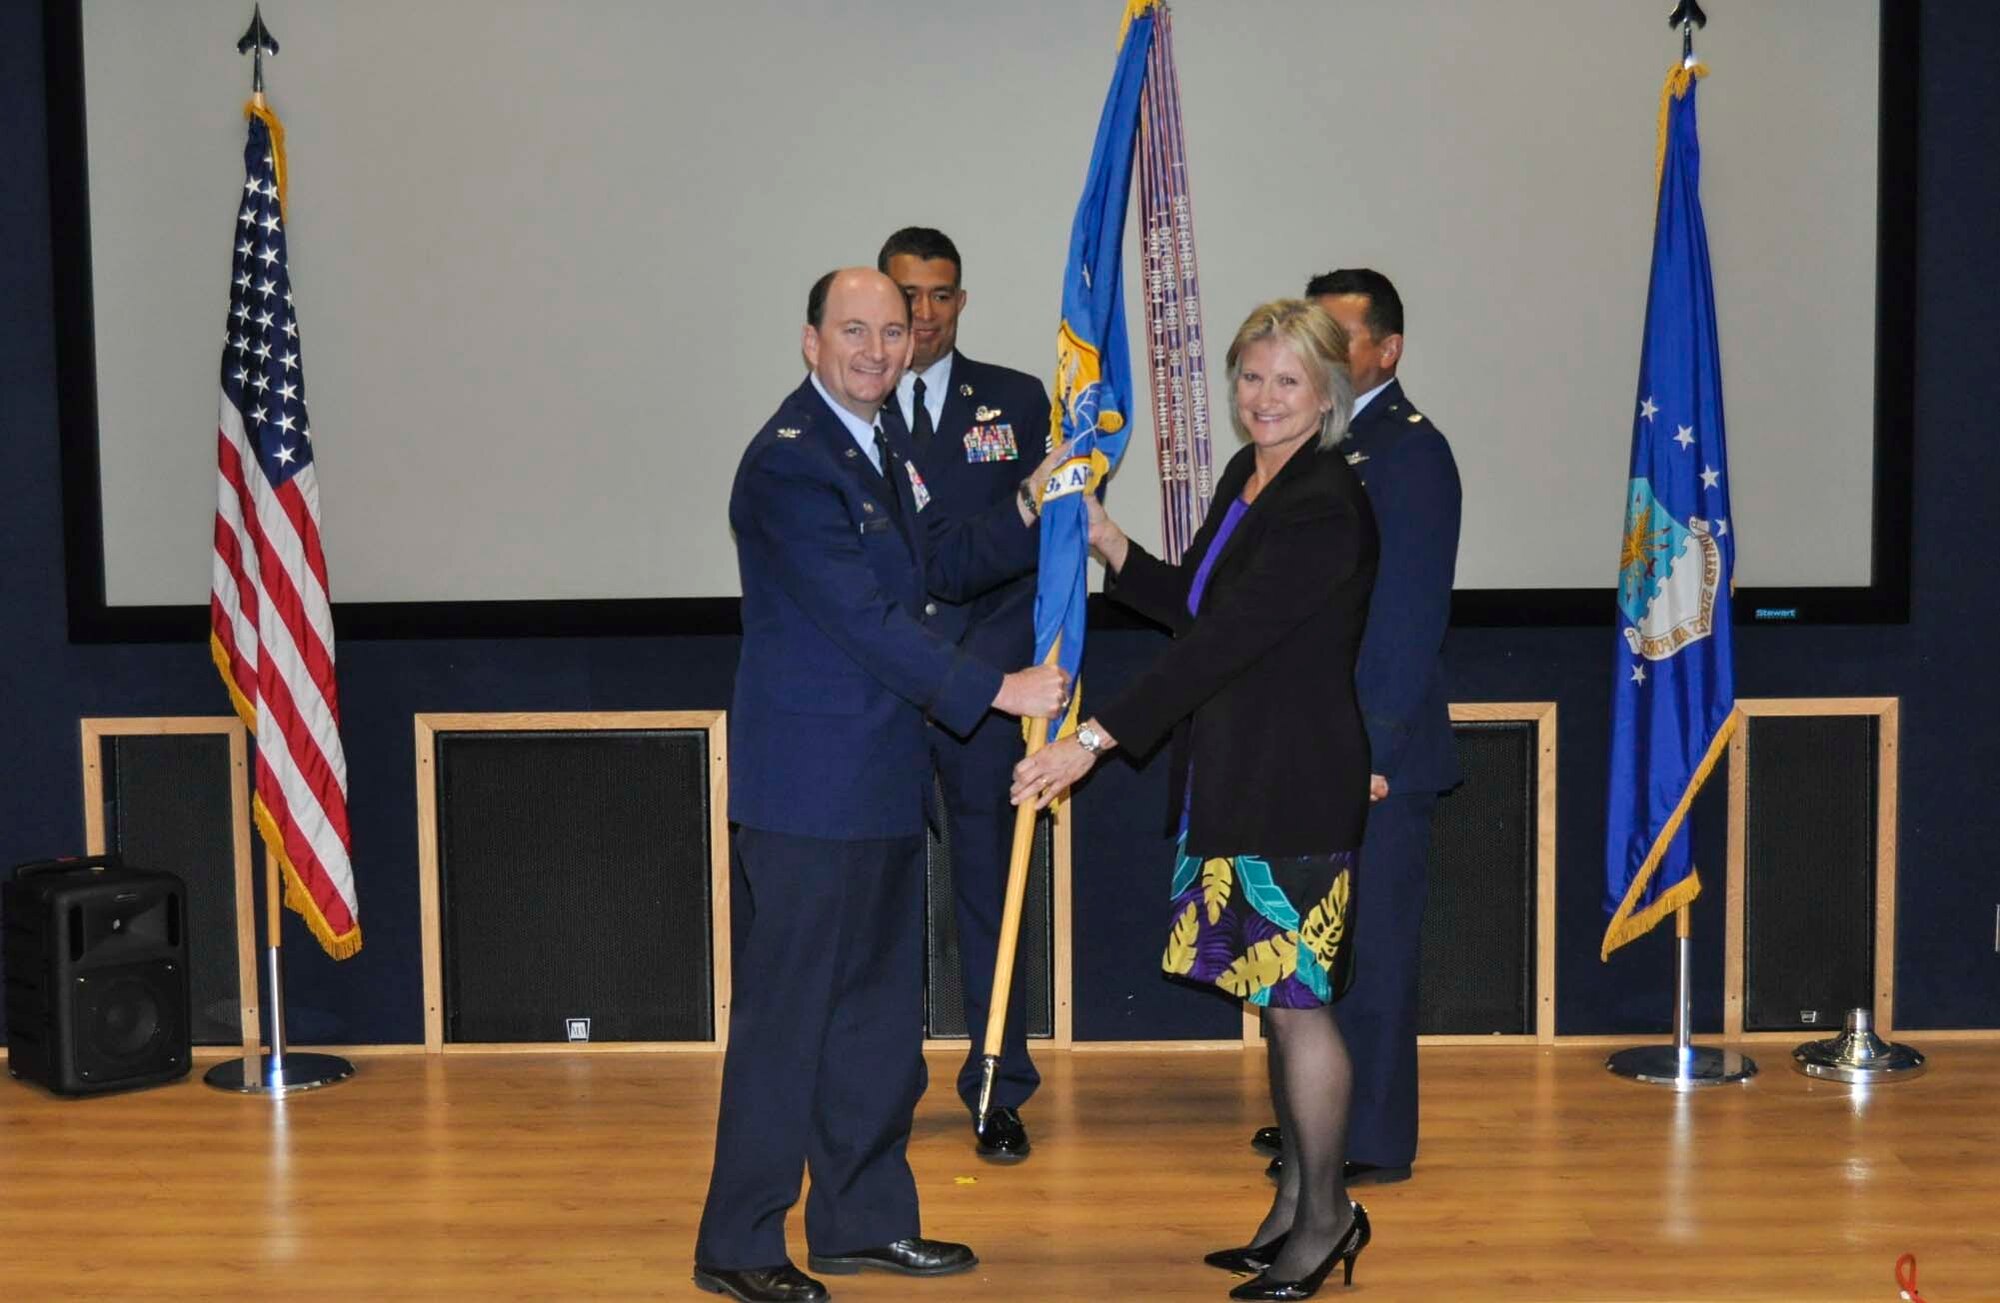 Audrey Magnuson accepts the 433rd Airlift Wing guidon from Col. Thomas K. Smith, Jr., 433rd Airlift Wing commander, during the Honorary Commanders Induction Ceremony April 30, 2016 at Joint Base San Antonio-Lackland. Magnuson is the director of the University of Texas San Antonio University Career Center and will be serving as the 433rd Aeromedical Evacuation Squadron Honorary Commander. (U.S. Air Force photo/Senior Airman Bryan Swink)